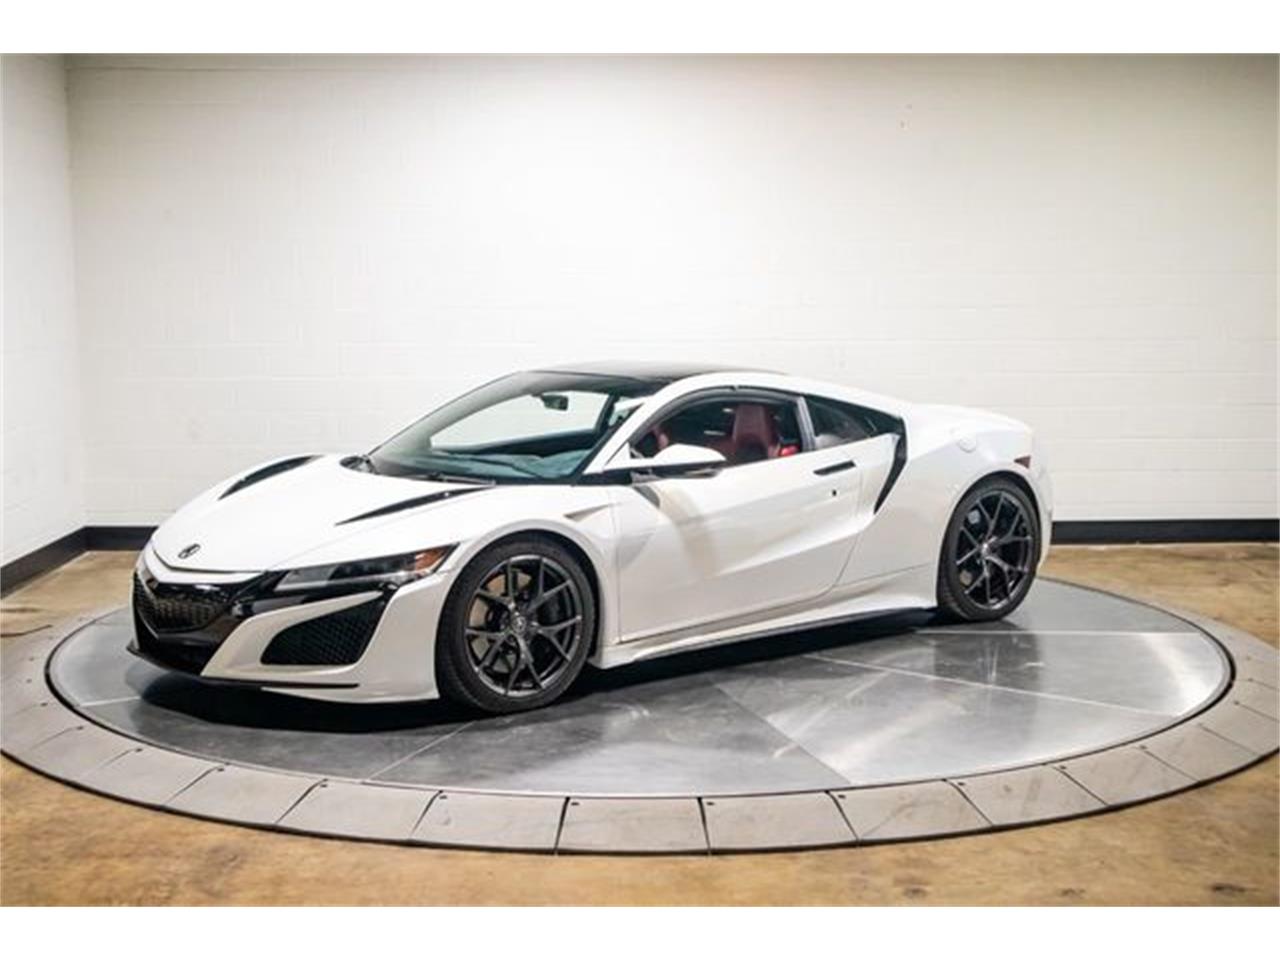 2017 Acura NSX for sale in Saint Louis, MO